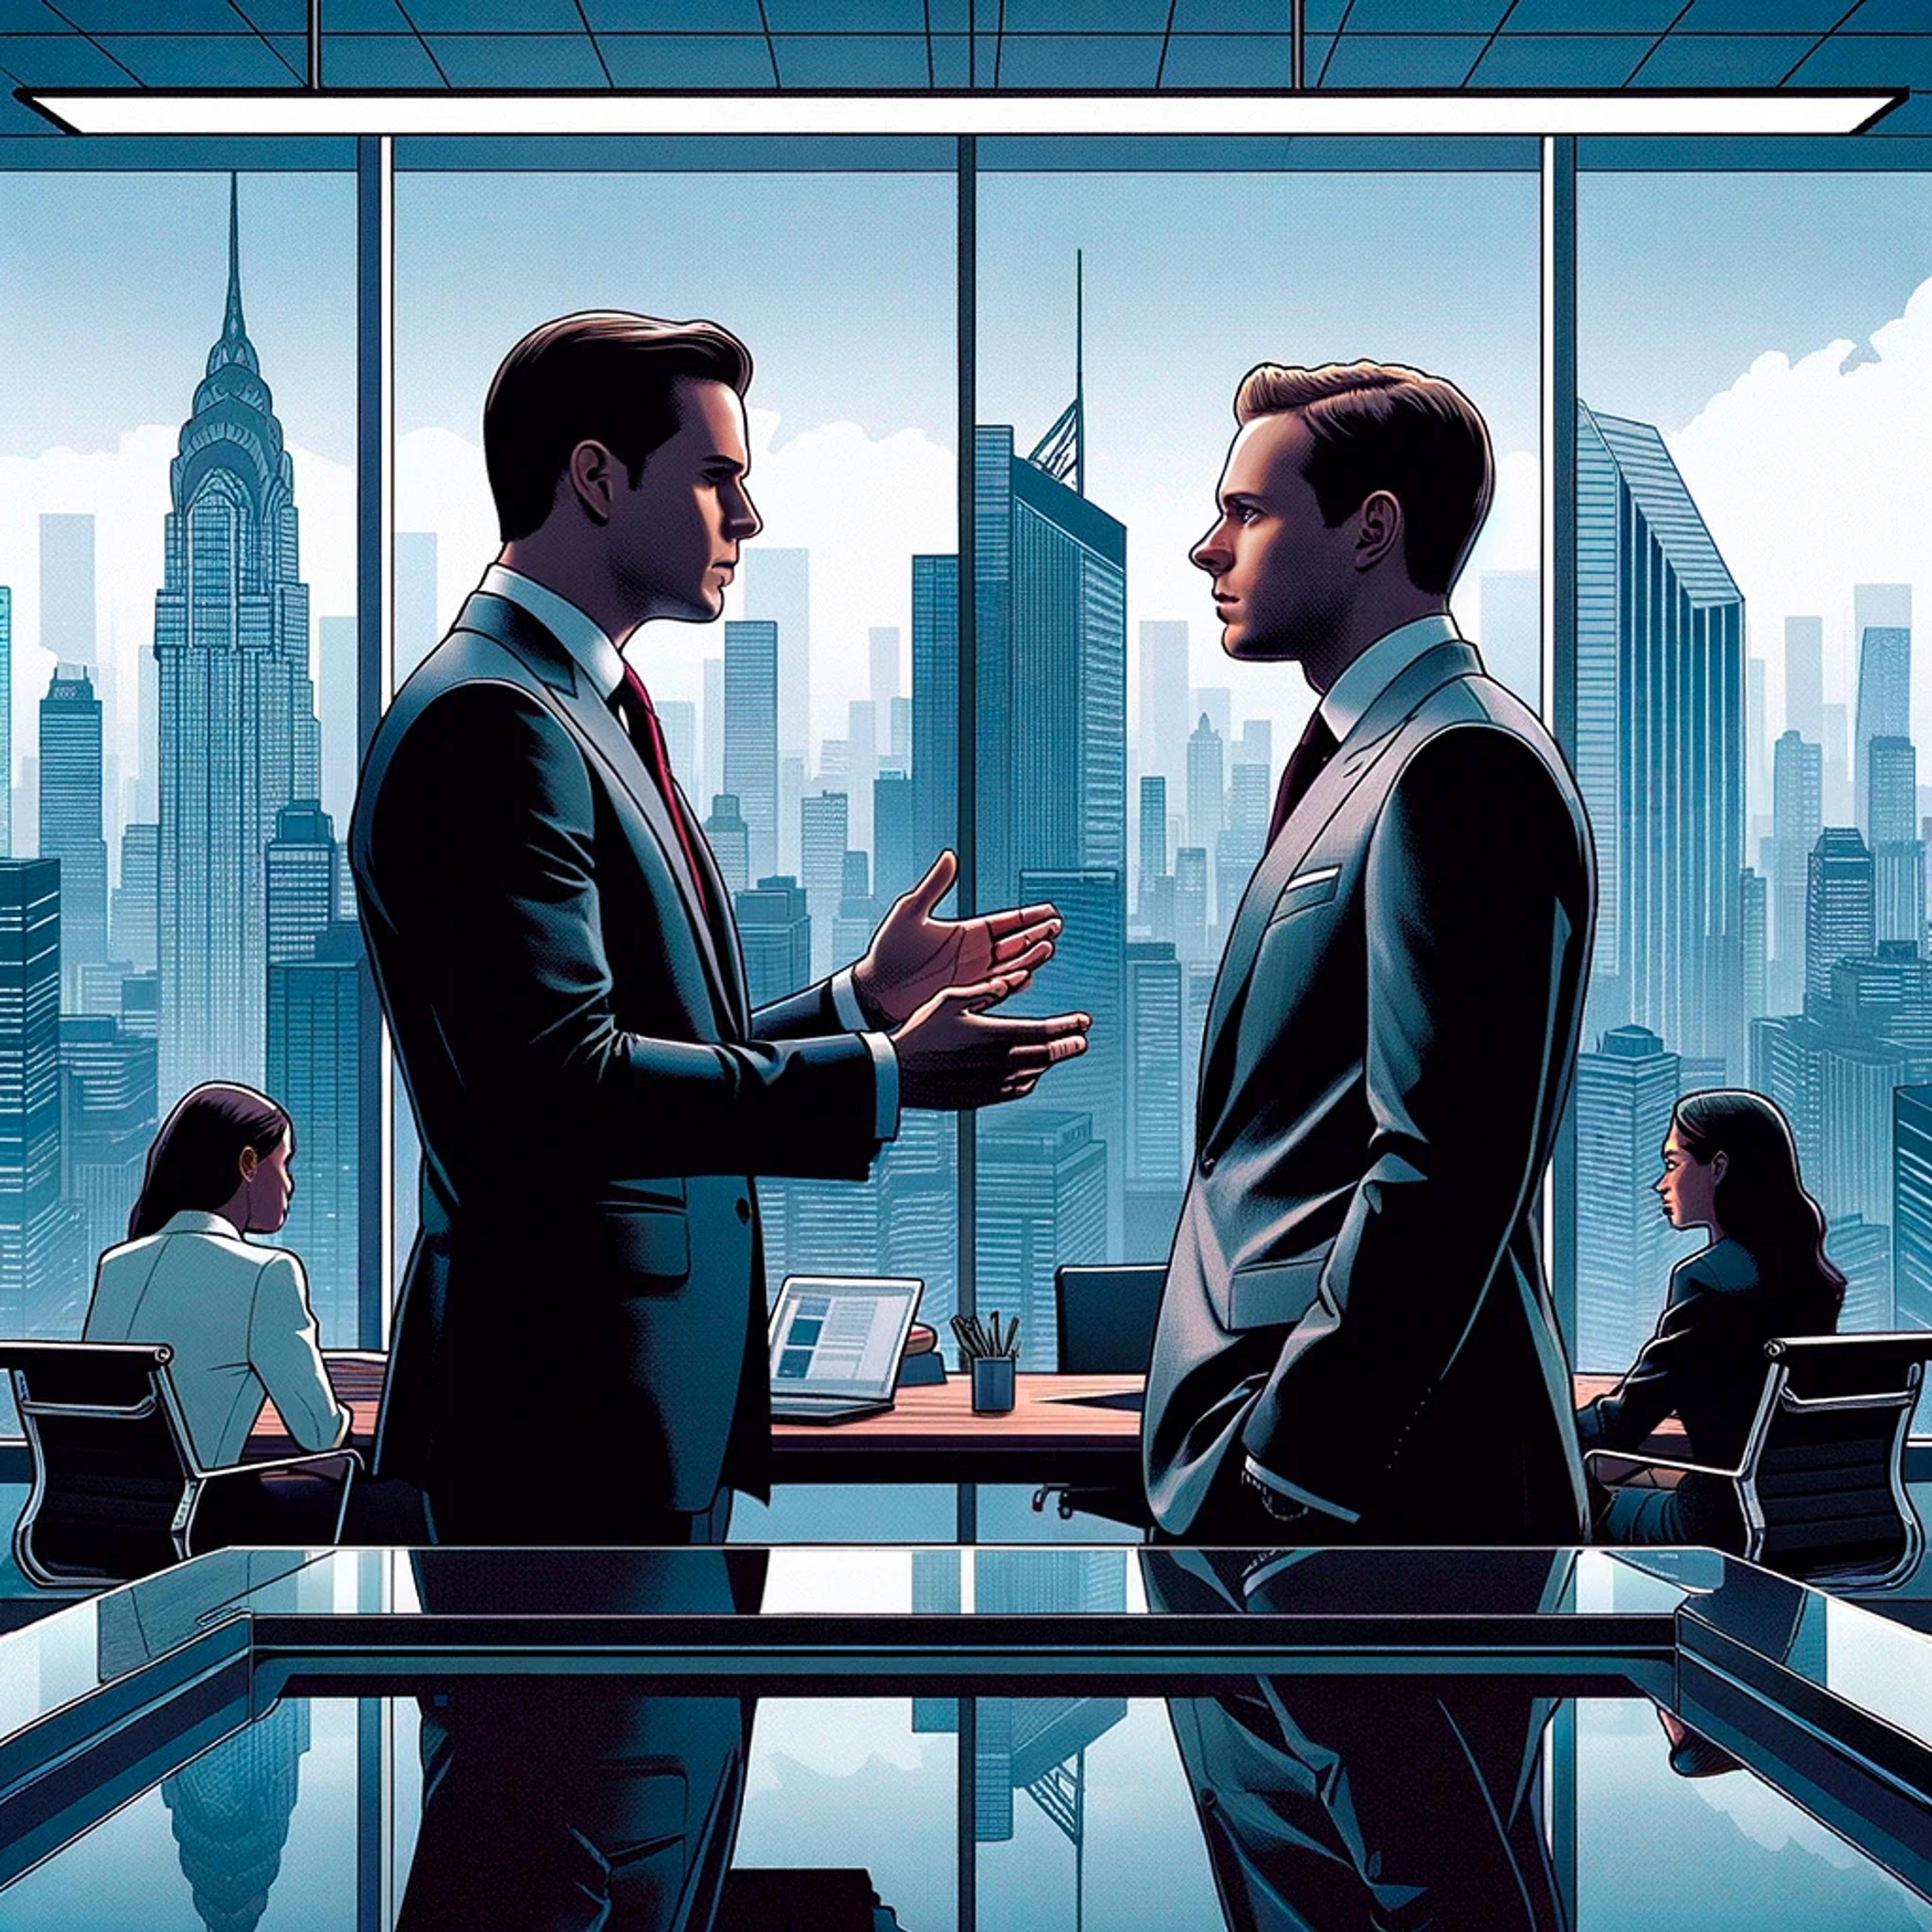 Depiction of Mike Ross and Harvey Spectre from Suits